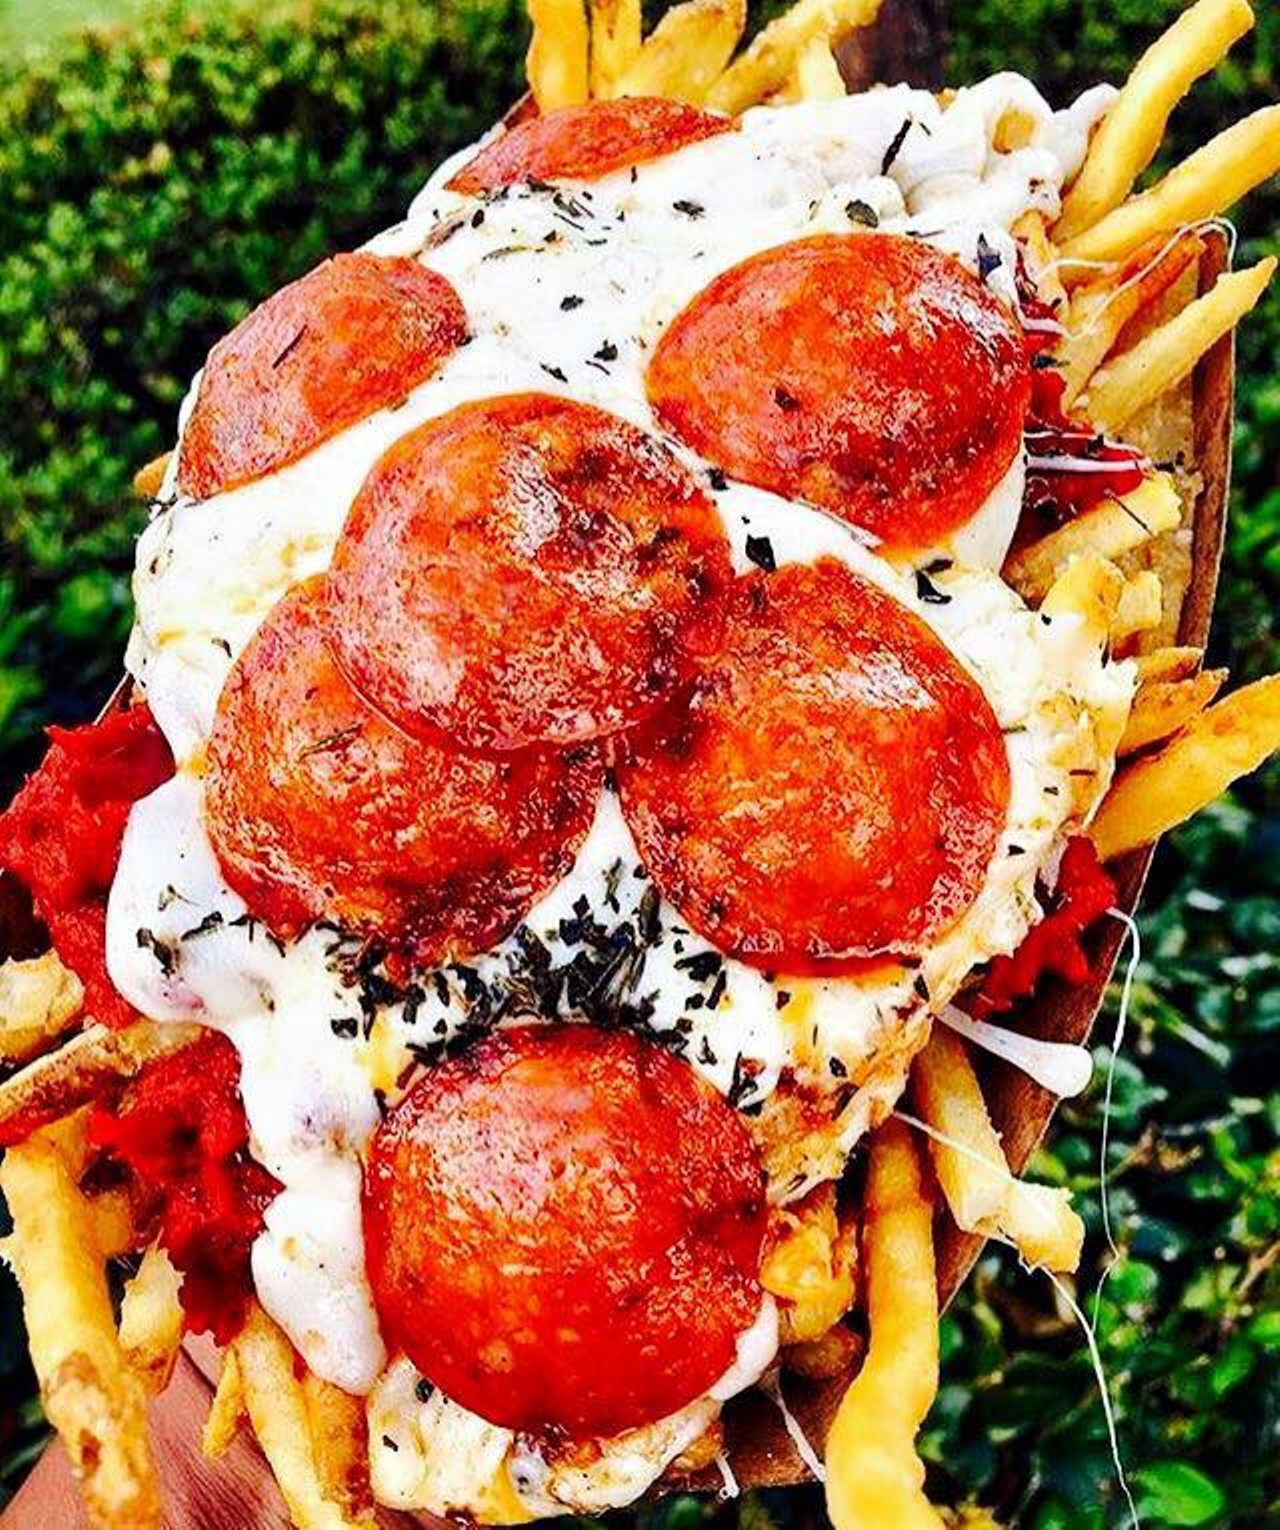 Eat some loaded fries this Fryday at St. Pete French Fry FestMaybe take some heartburn medication first...Fri., Feb. 15
Photo via Gulf to Bay Food Truck Association's Facebook page